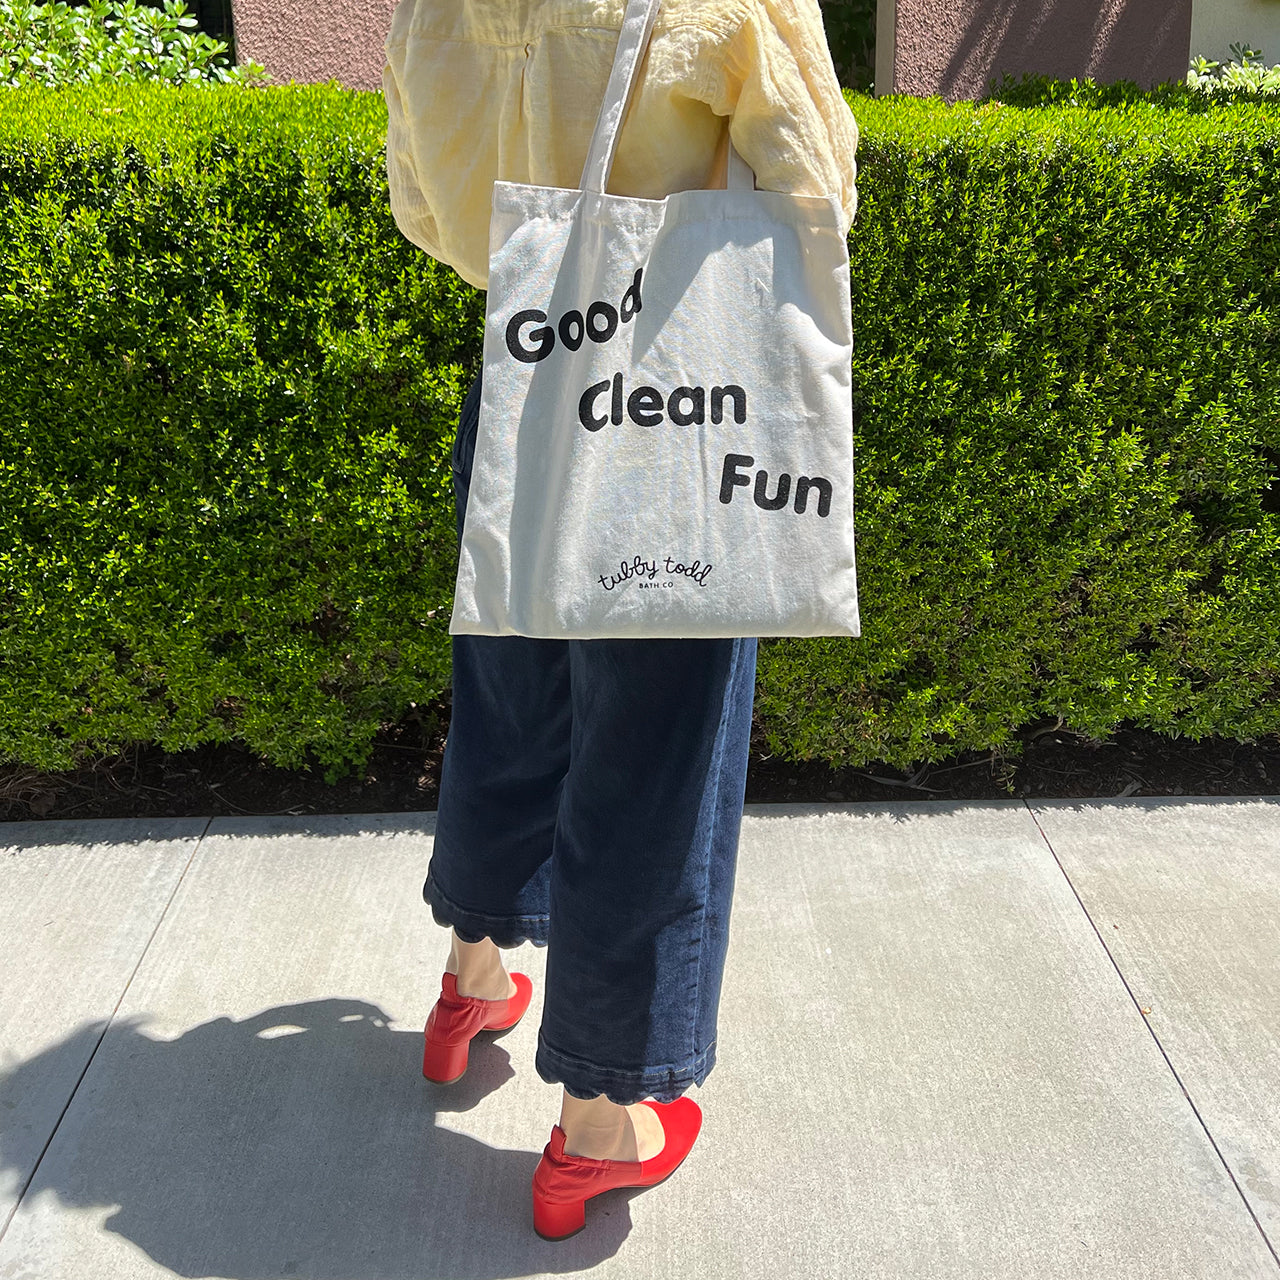 Good Clean Fun tote being modeled